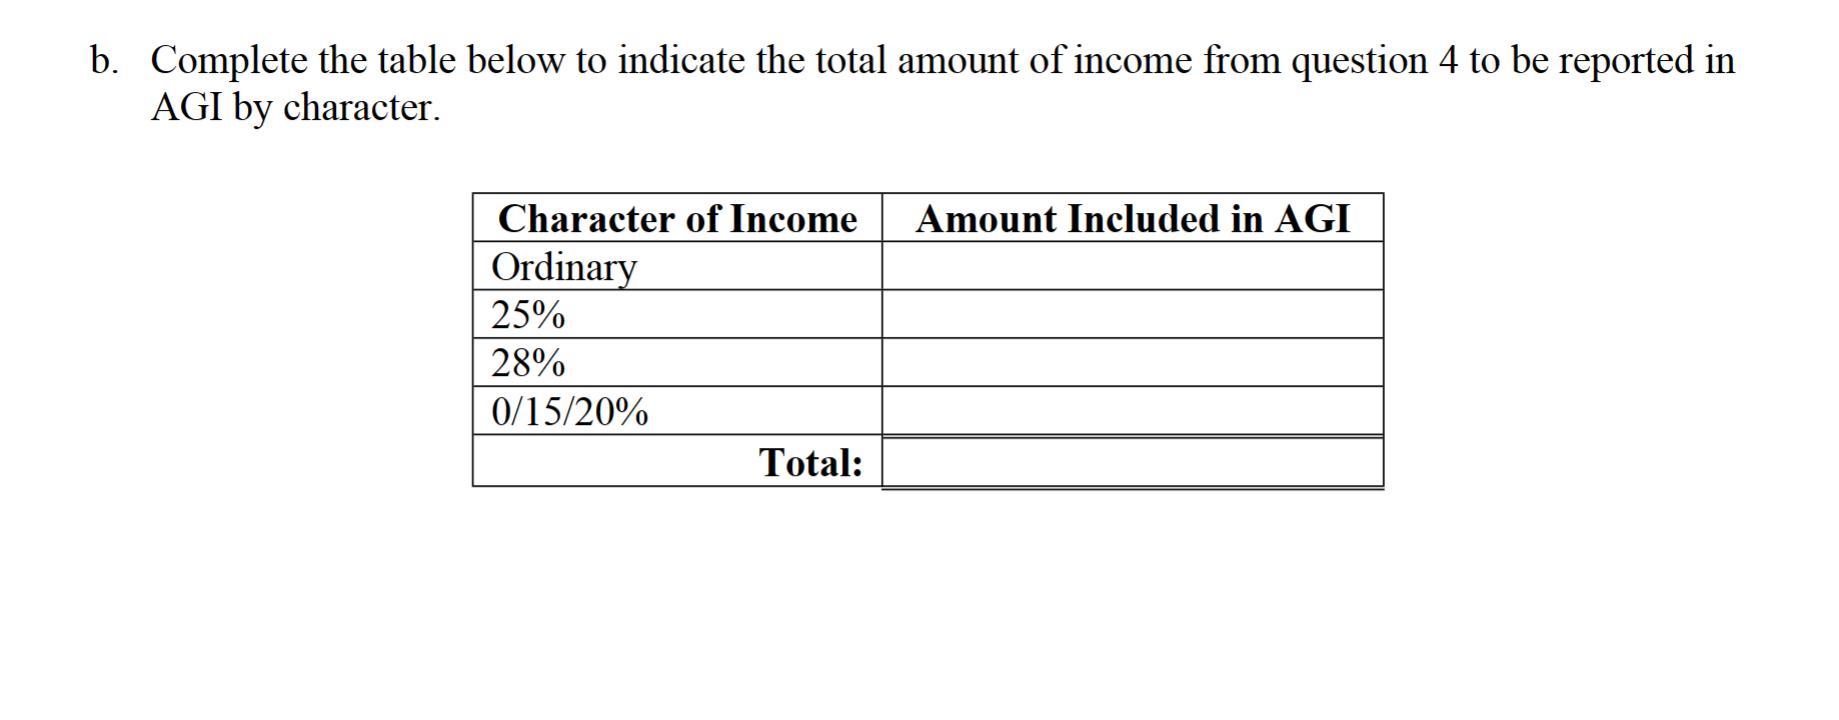 b. Complete the table below to indicate the total amount of income from question 4 to be reported in AGI by